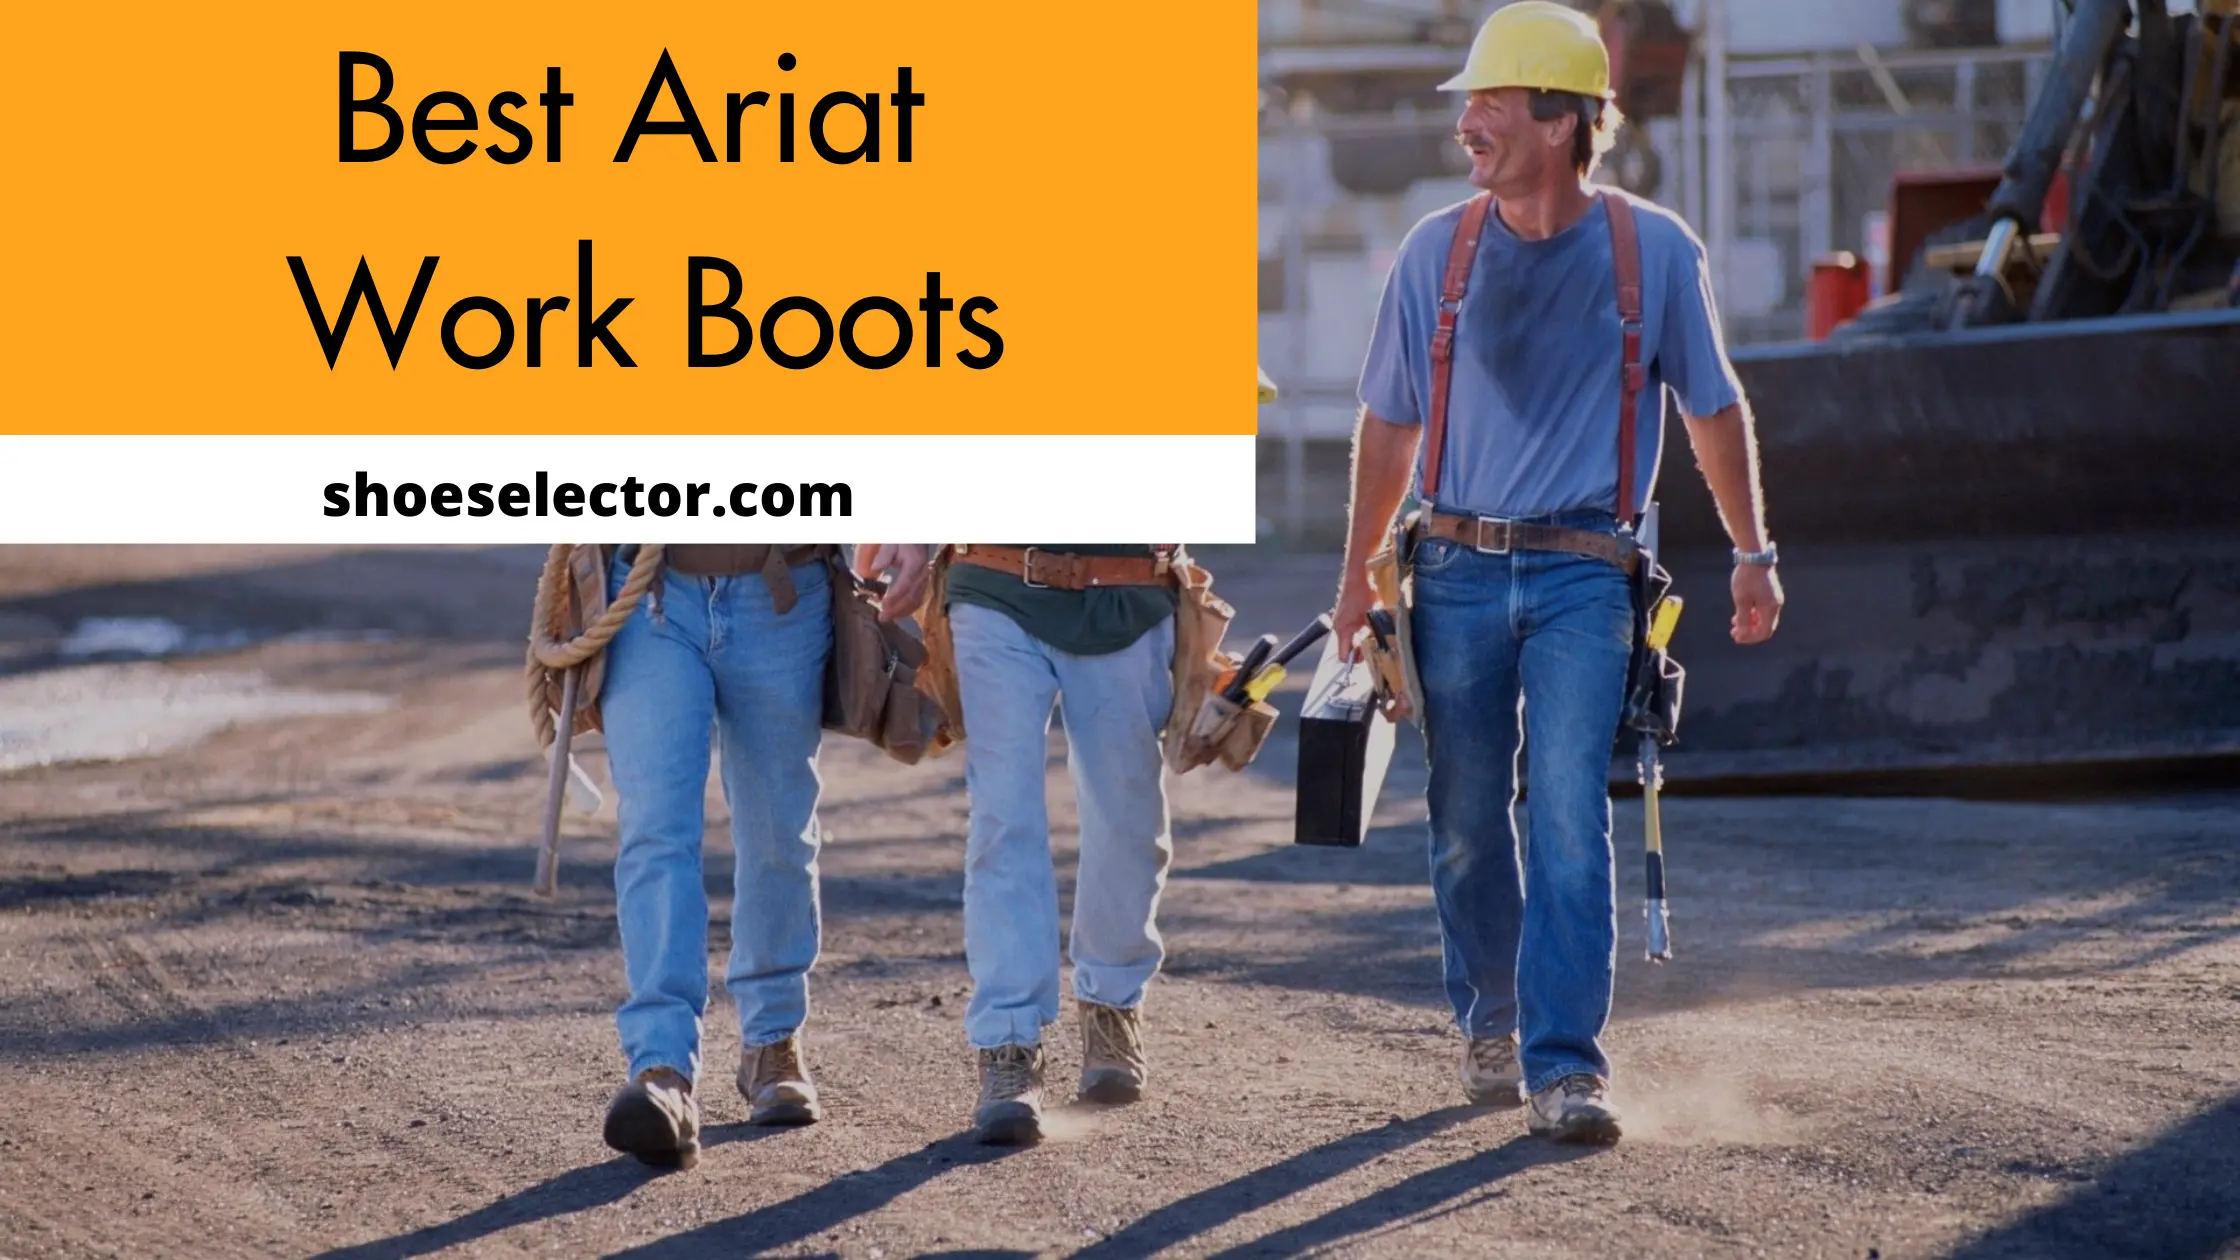 Best Ariat Work Boots - Recommended Guide by Experts